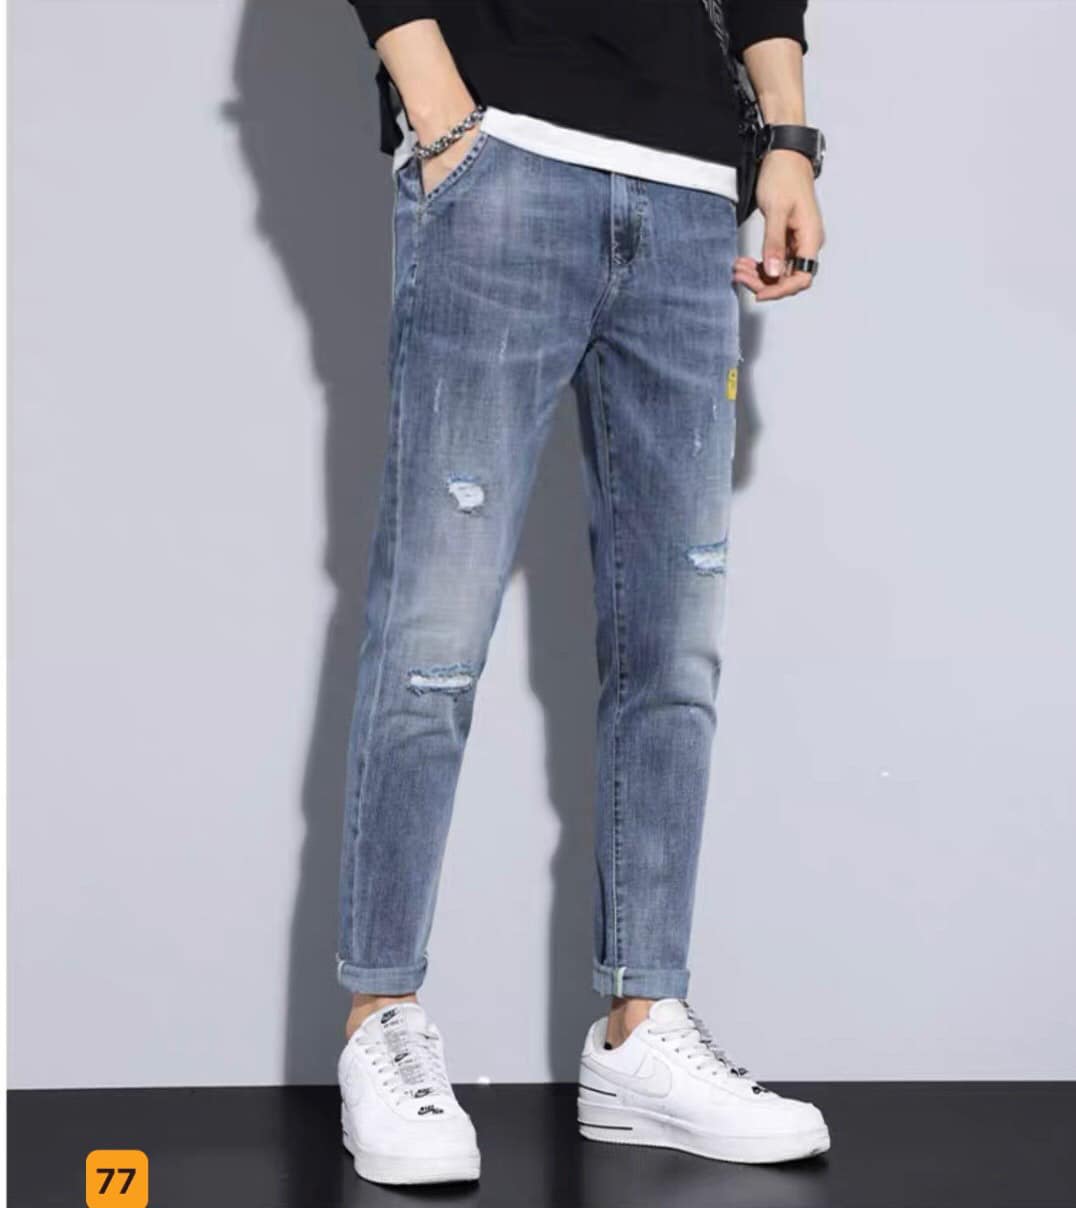 77 & 97 & 106 men s stretch solid blue high-grade jeans shorts